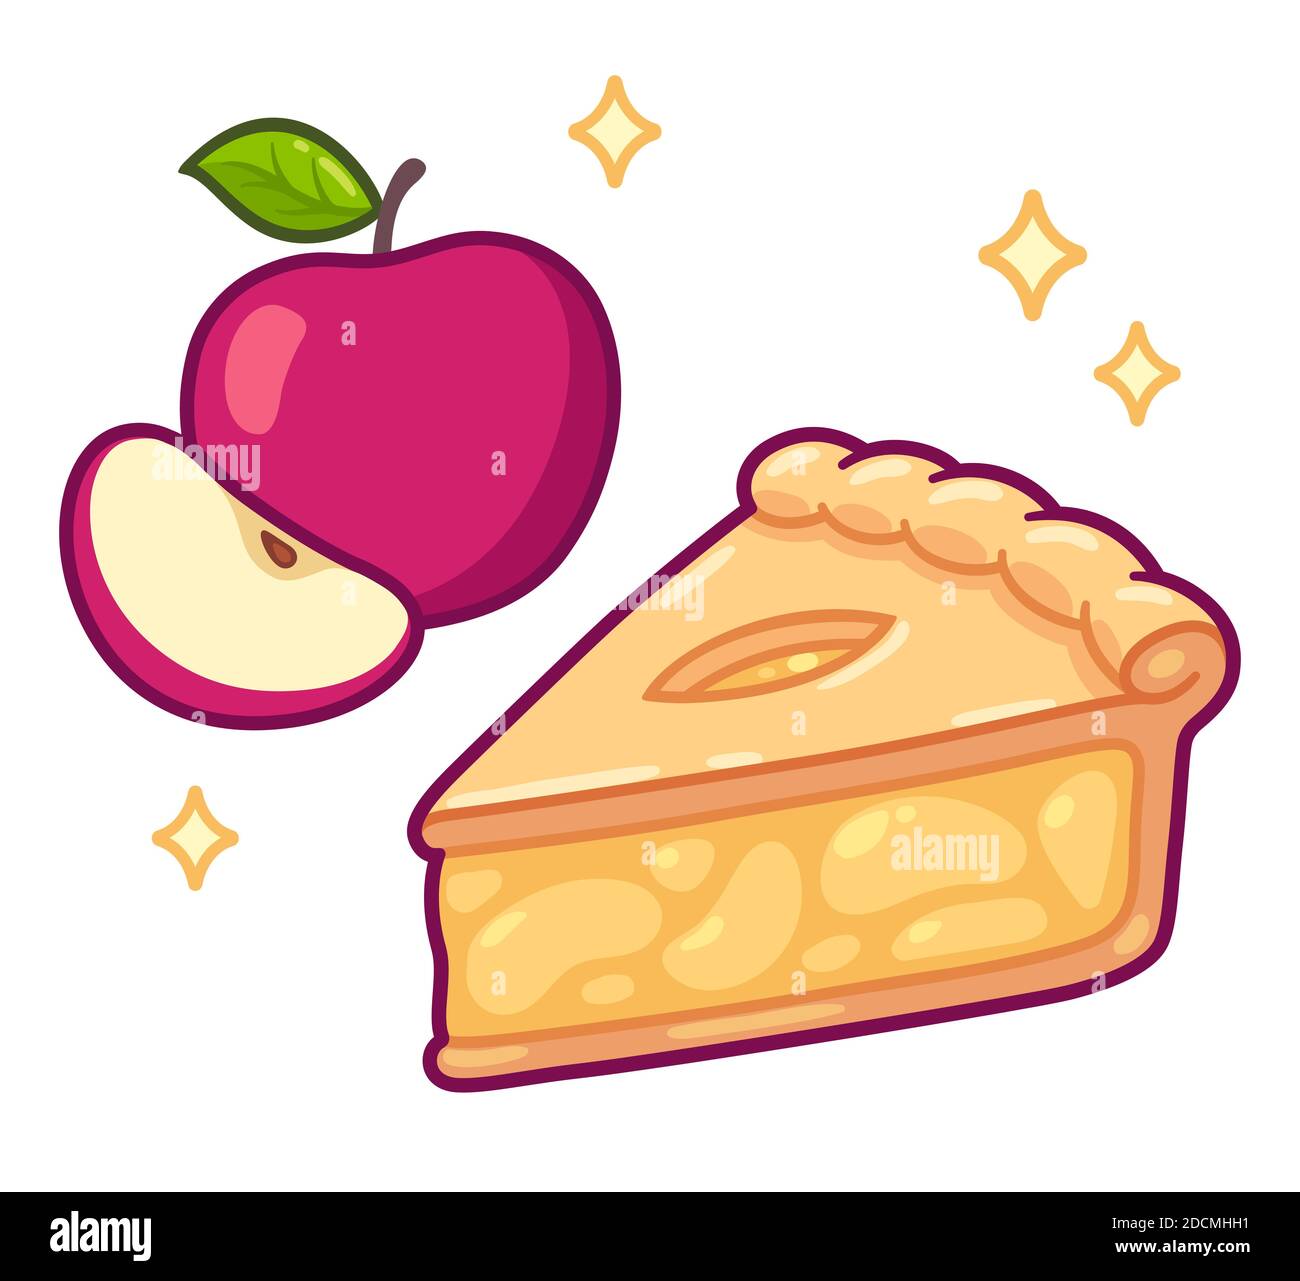 Cute cartoon apple pie drawing. Simple hand drawn pie slice with red apples. Isolated vector clip art illustration. Stock Vector